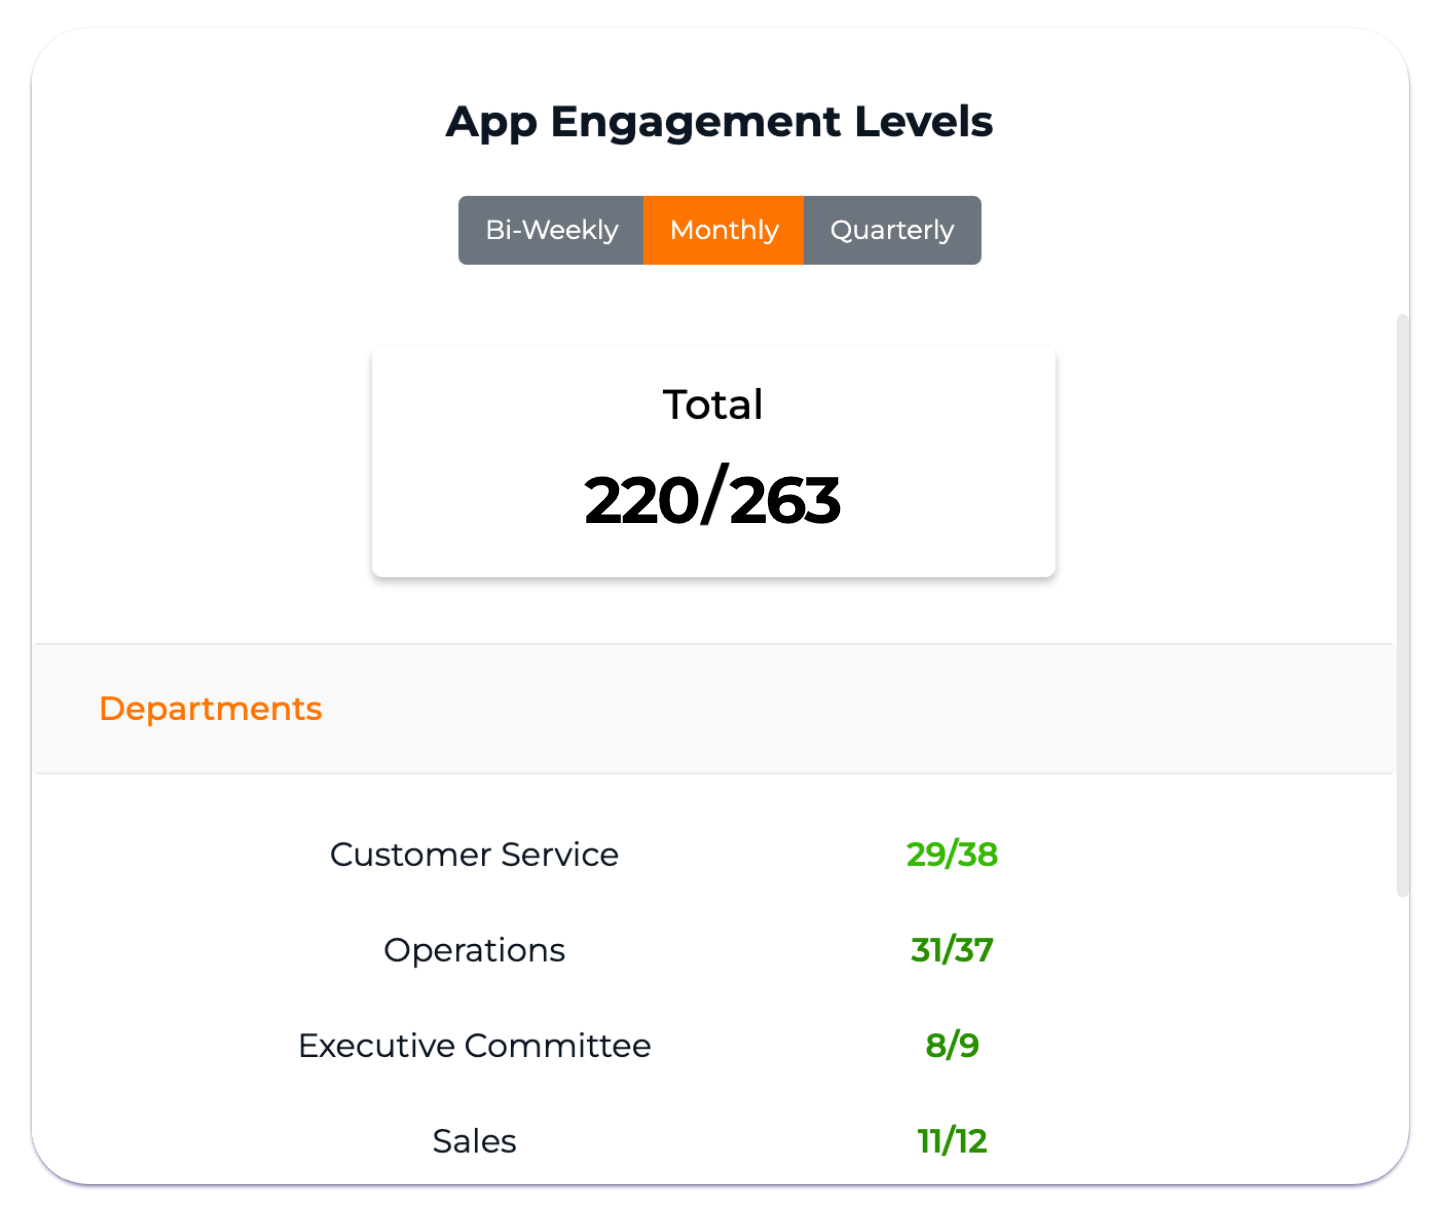 Section of the Wotter platform titled 'App Engagement Levels' and shows high monthly app engagement, a Total of 220/263 employees, then shows a split of the app engagement within each Department, e.g. 29/38 in Customer Service and 31/37 in Operations.